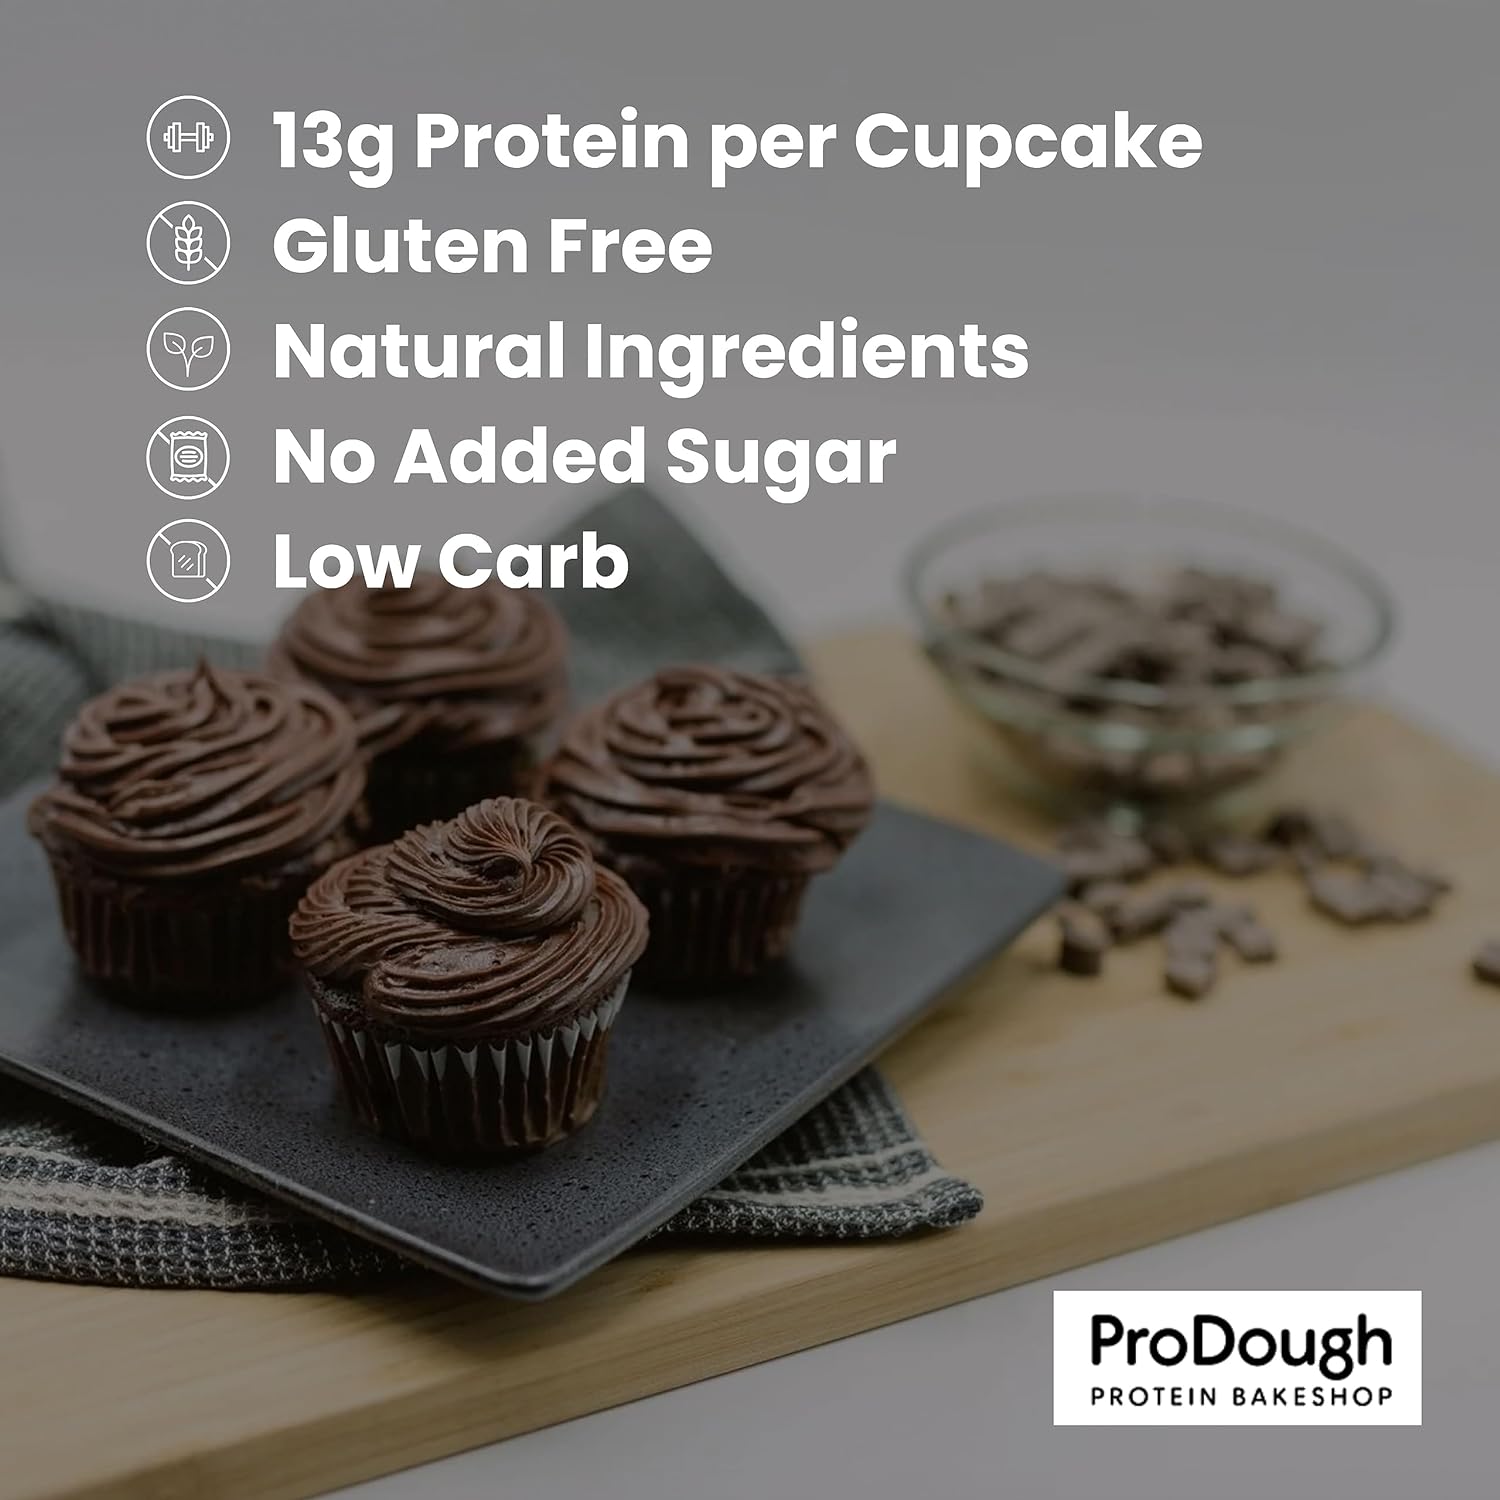 ProDough High Protein- Gluten Free Cupcake Mix, Low Carb, 13g of Protein per Cupcake, No Added Sugars, Keto Friendly, Makes 12, Healthy Dessert (Vanilla) : Grocery & Gourmet Food